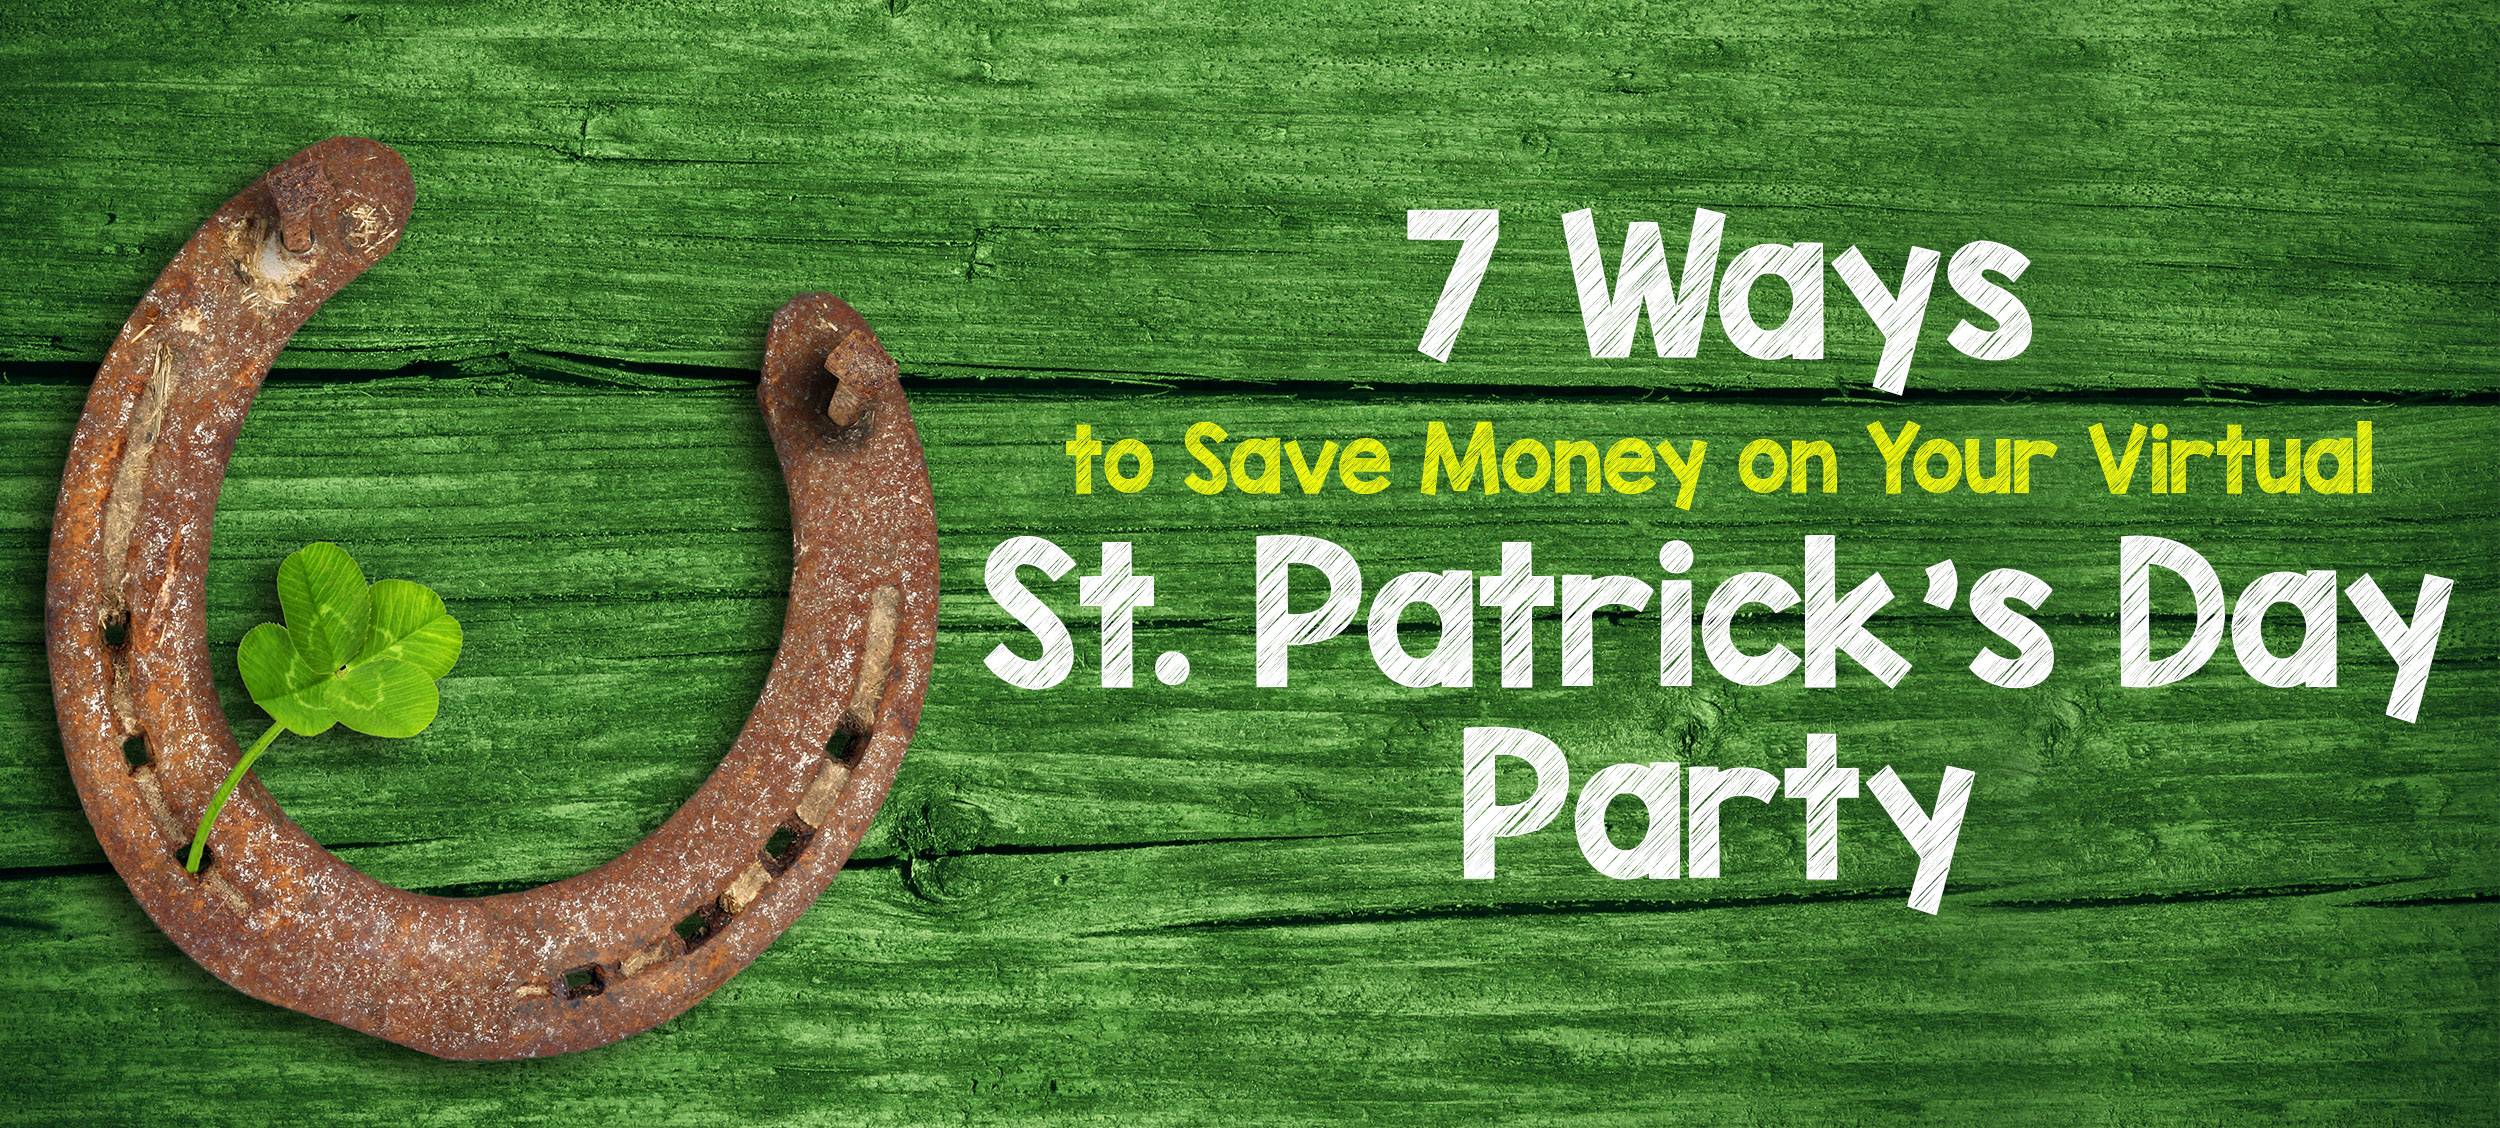 7 Ways to Save Money on Your Virtual St. Patrick’s Day Party